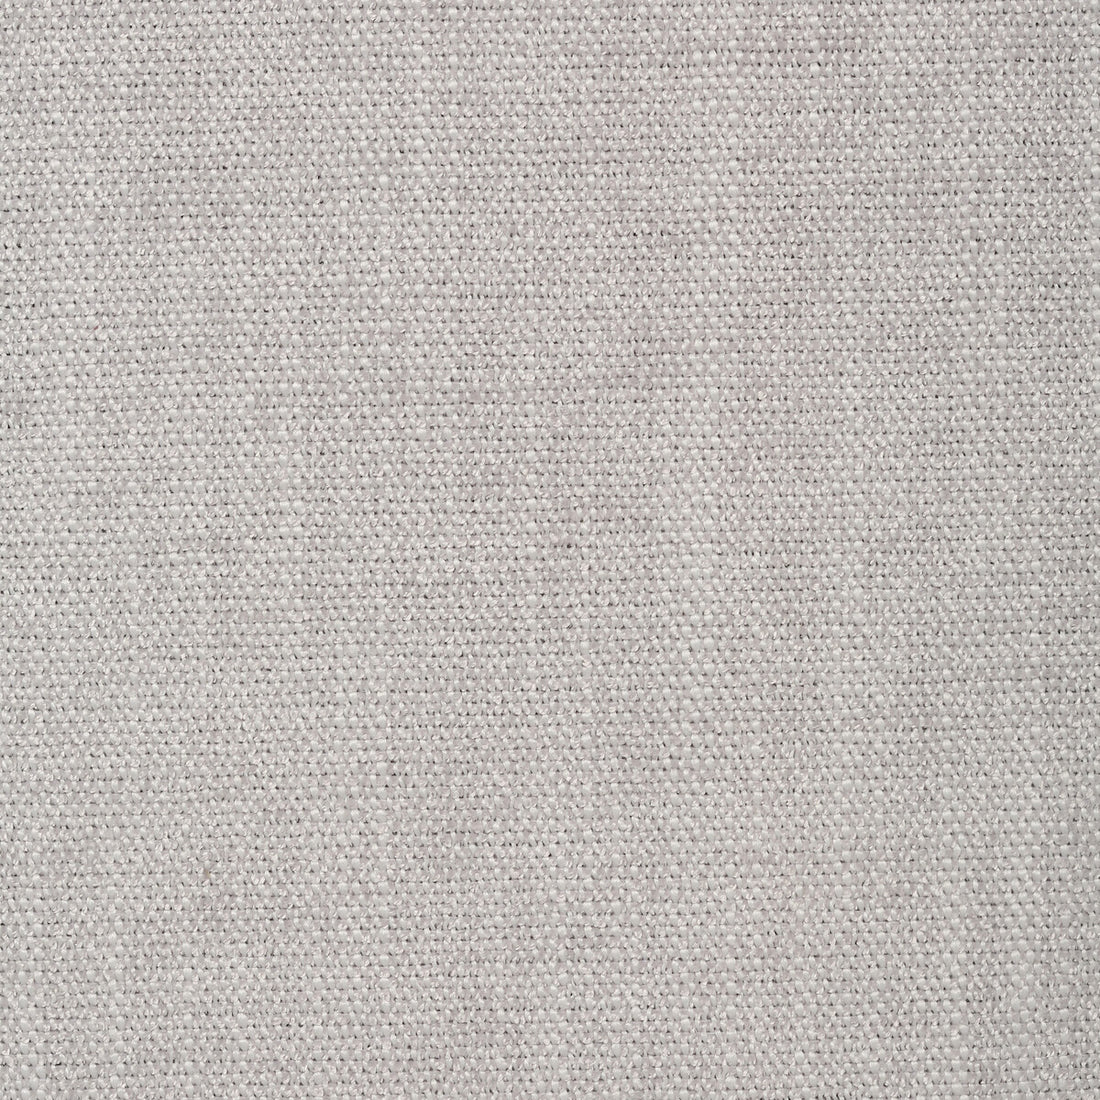 Kravet Smart fabric in 35113-11 color - pattern 35113.11.0 - by Kravet Smart in the Performance Crypton Home collection